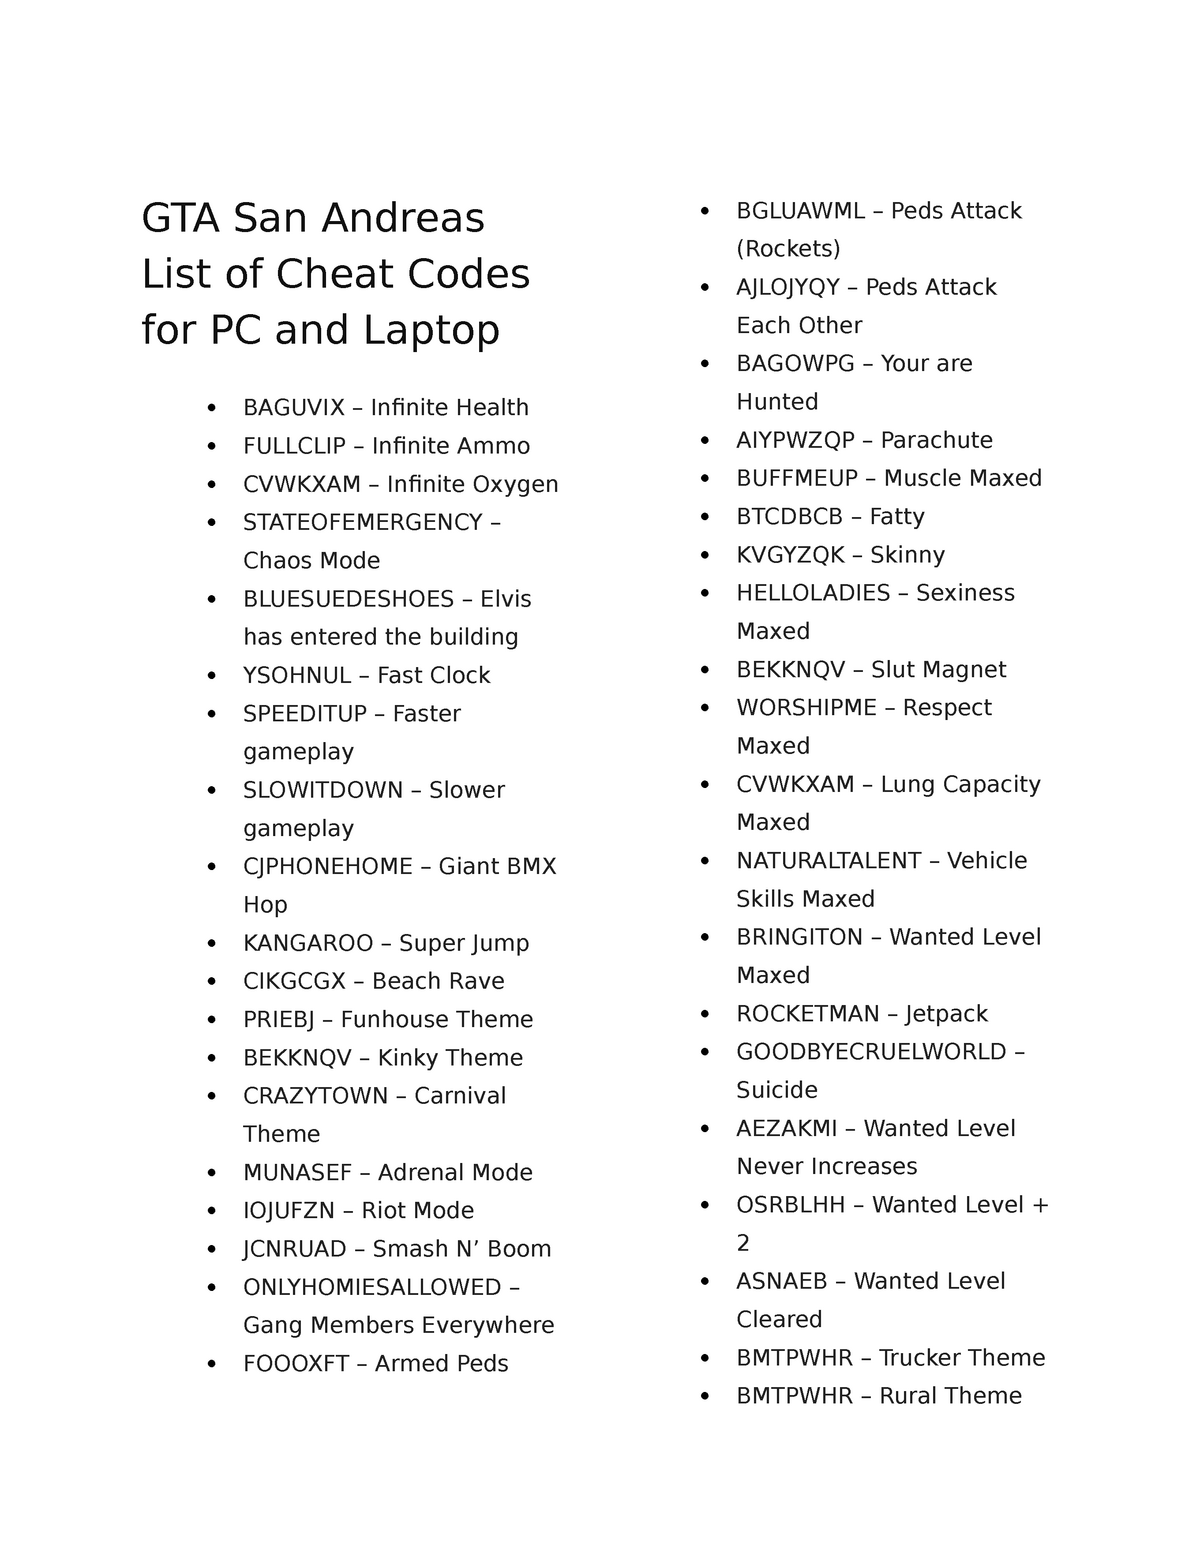 cp-wadaasdlhhv-gta-san-andreas-list-of-cheat-codes-for-pc-and